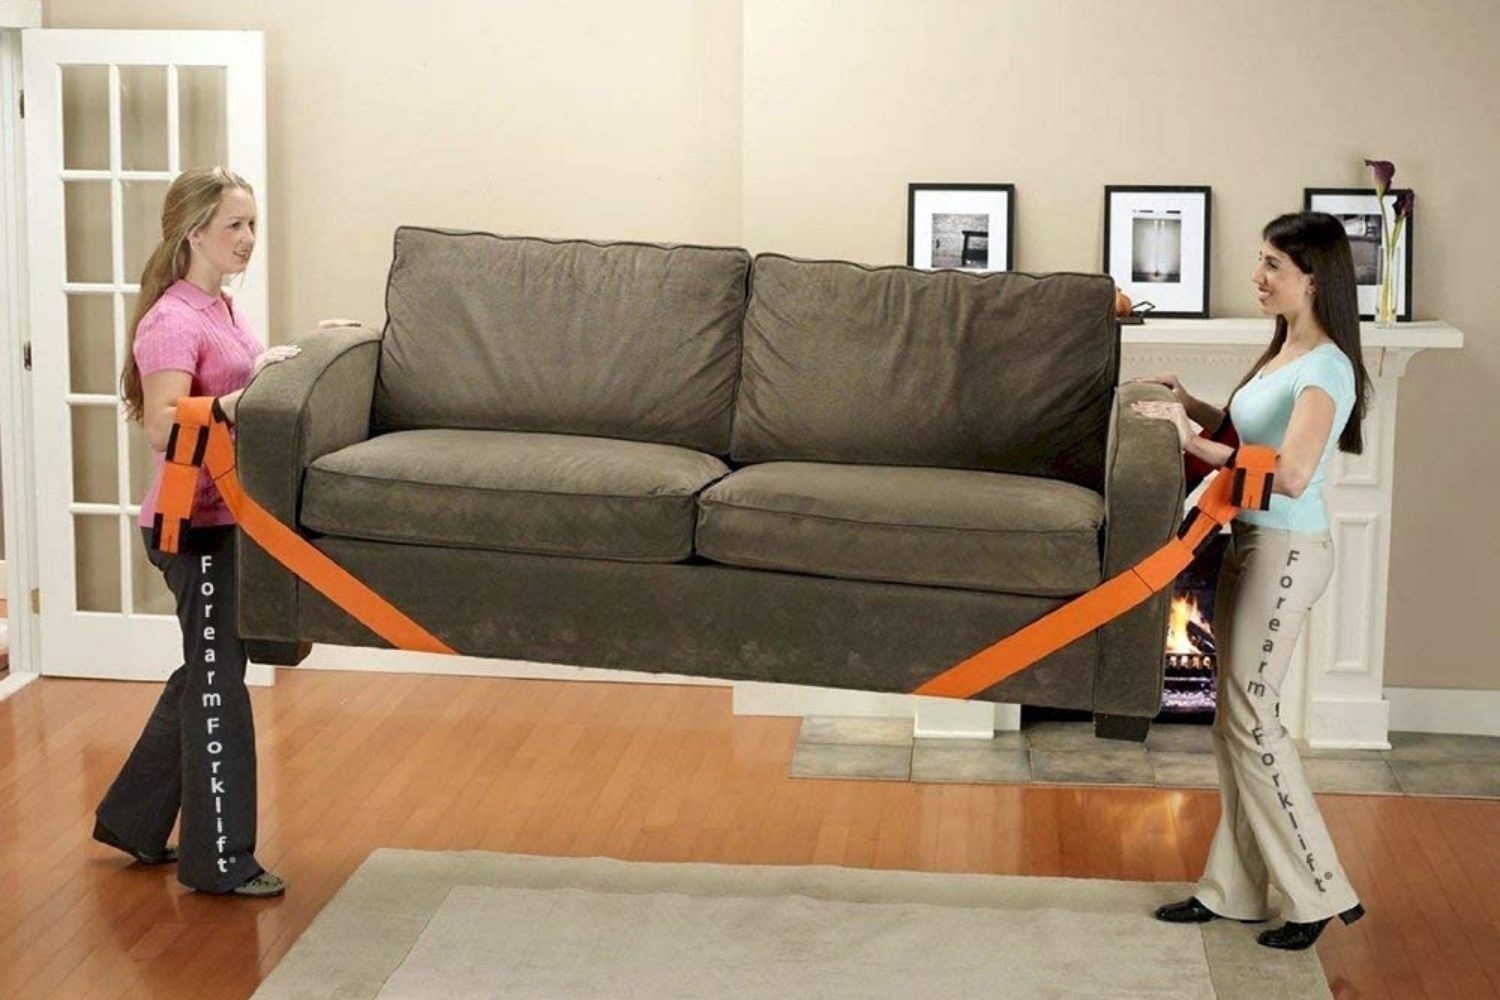 Moving Heavy Furniture? Learn About Moving Straps